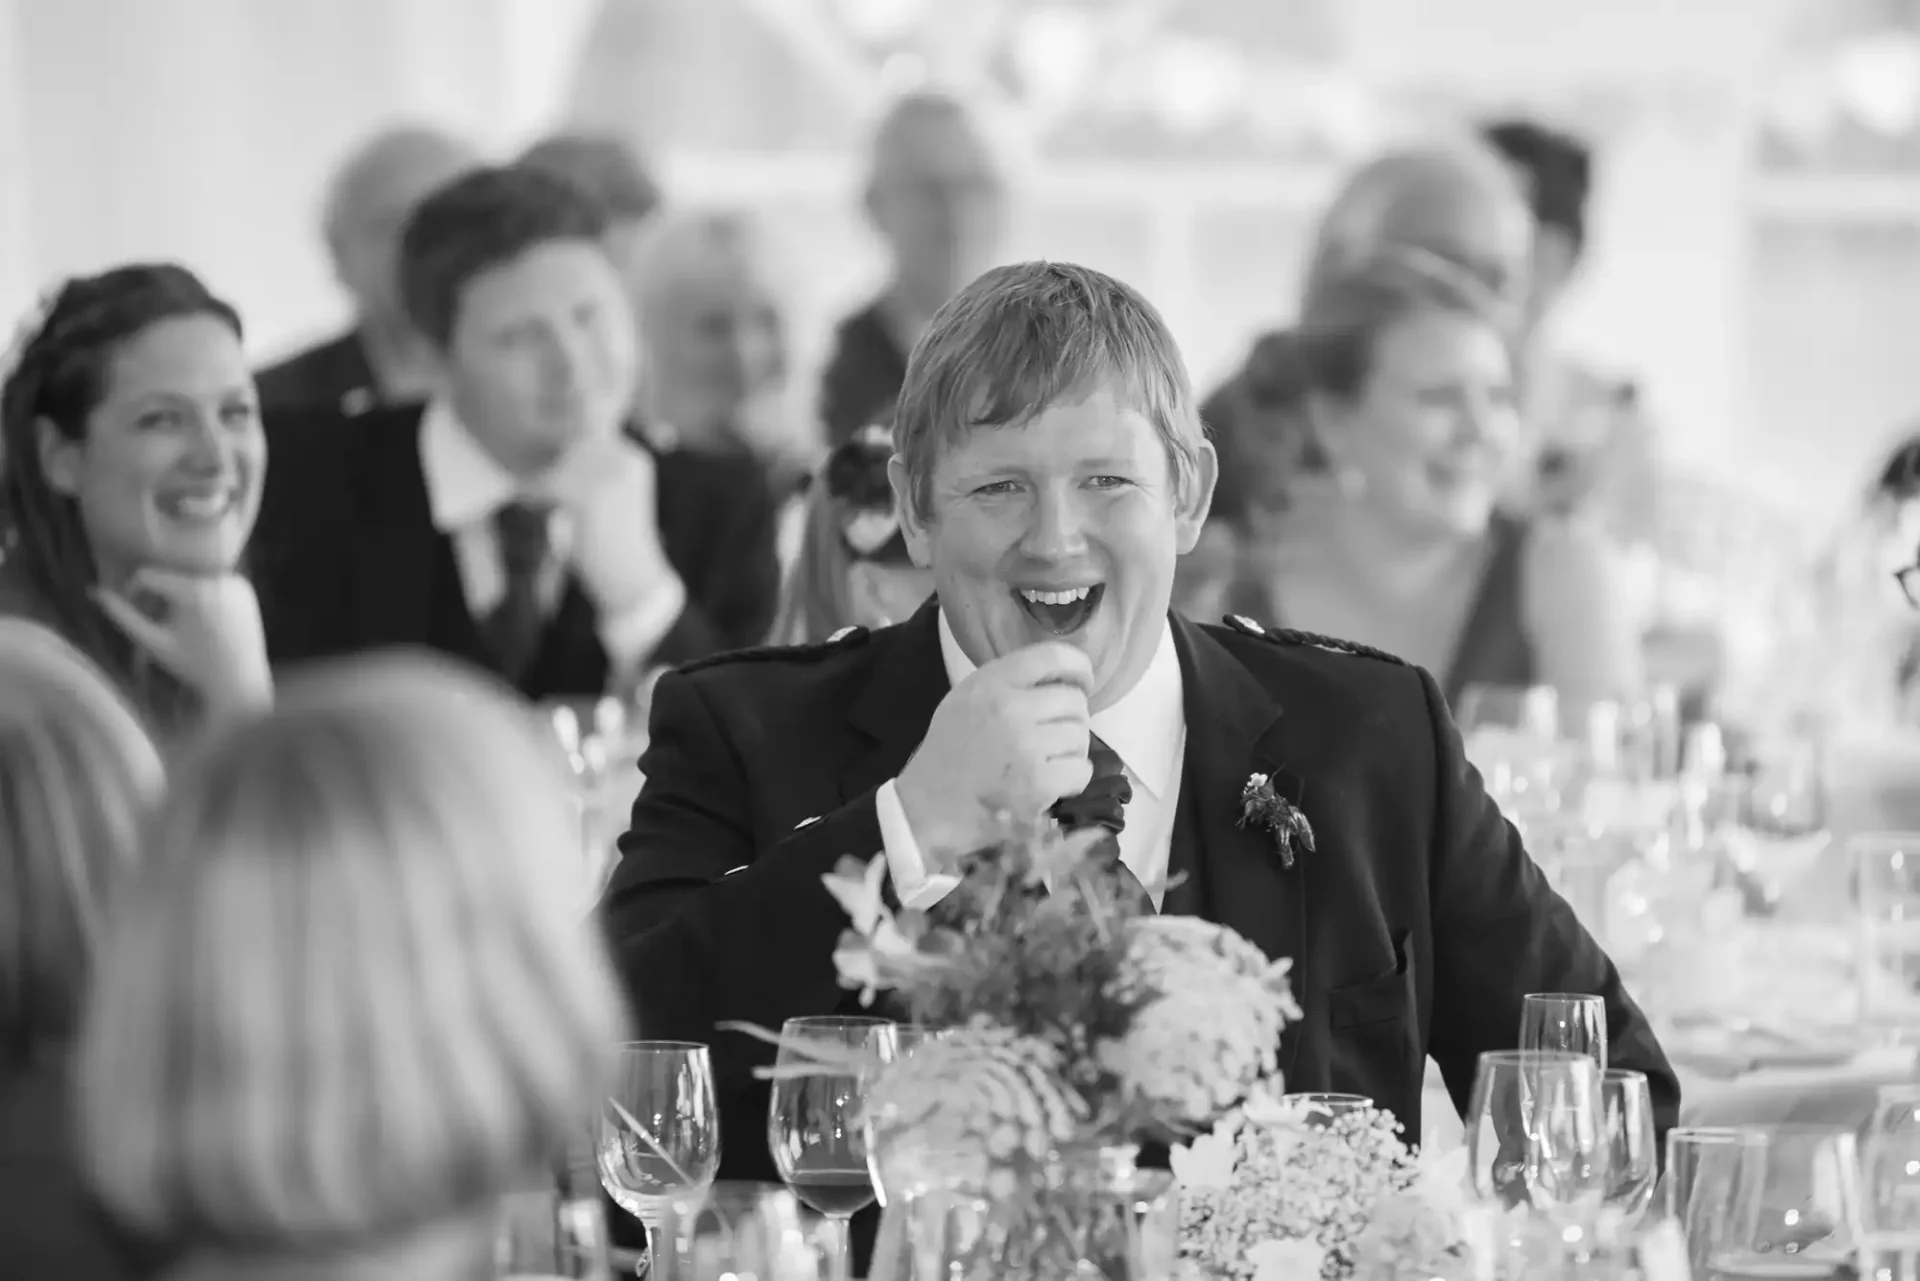 A man in a suit laughing at a wedding reception table in a black and white photograph, surrounded by other guests.